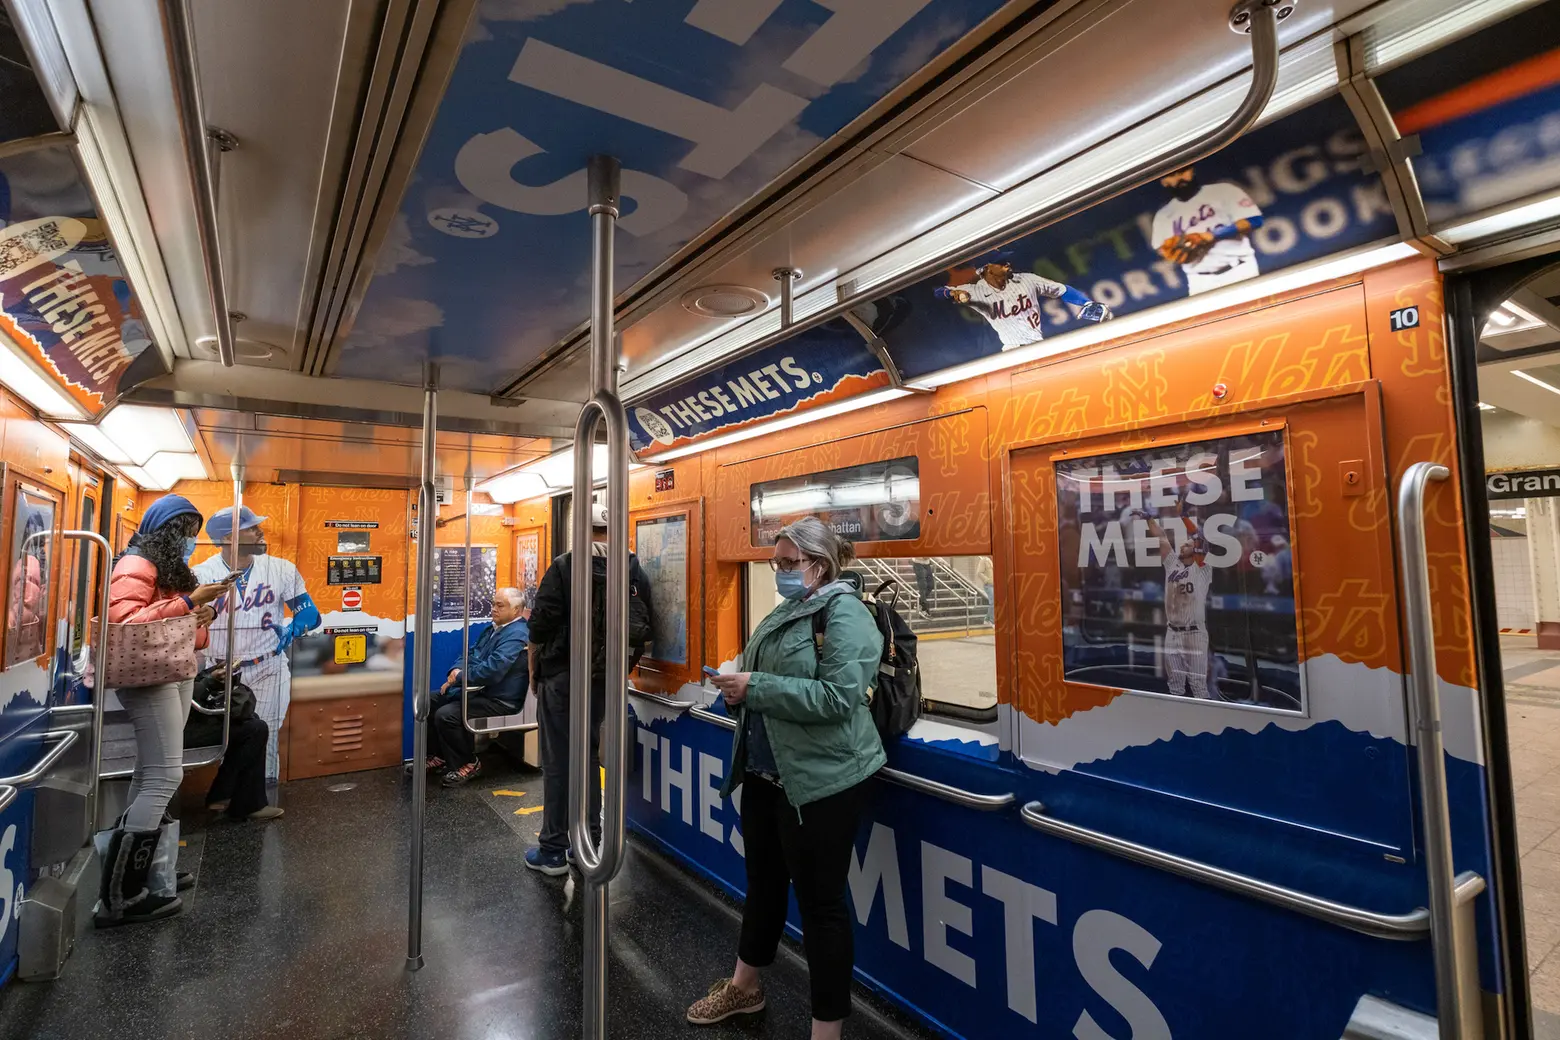 New York Mets take over the NYC subway for playoff run